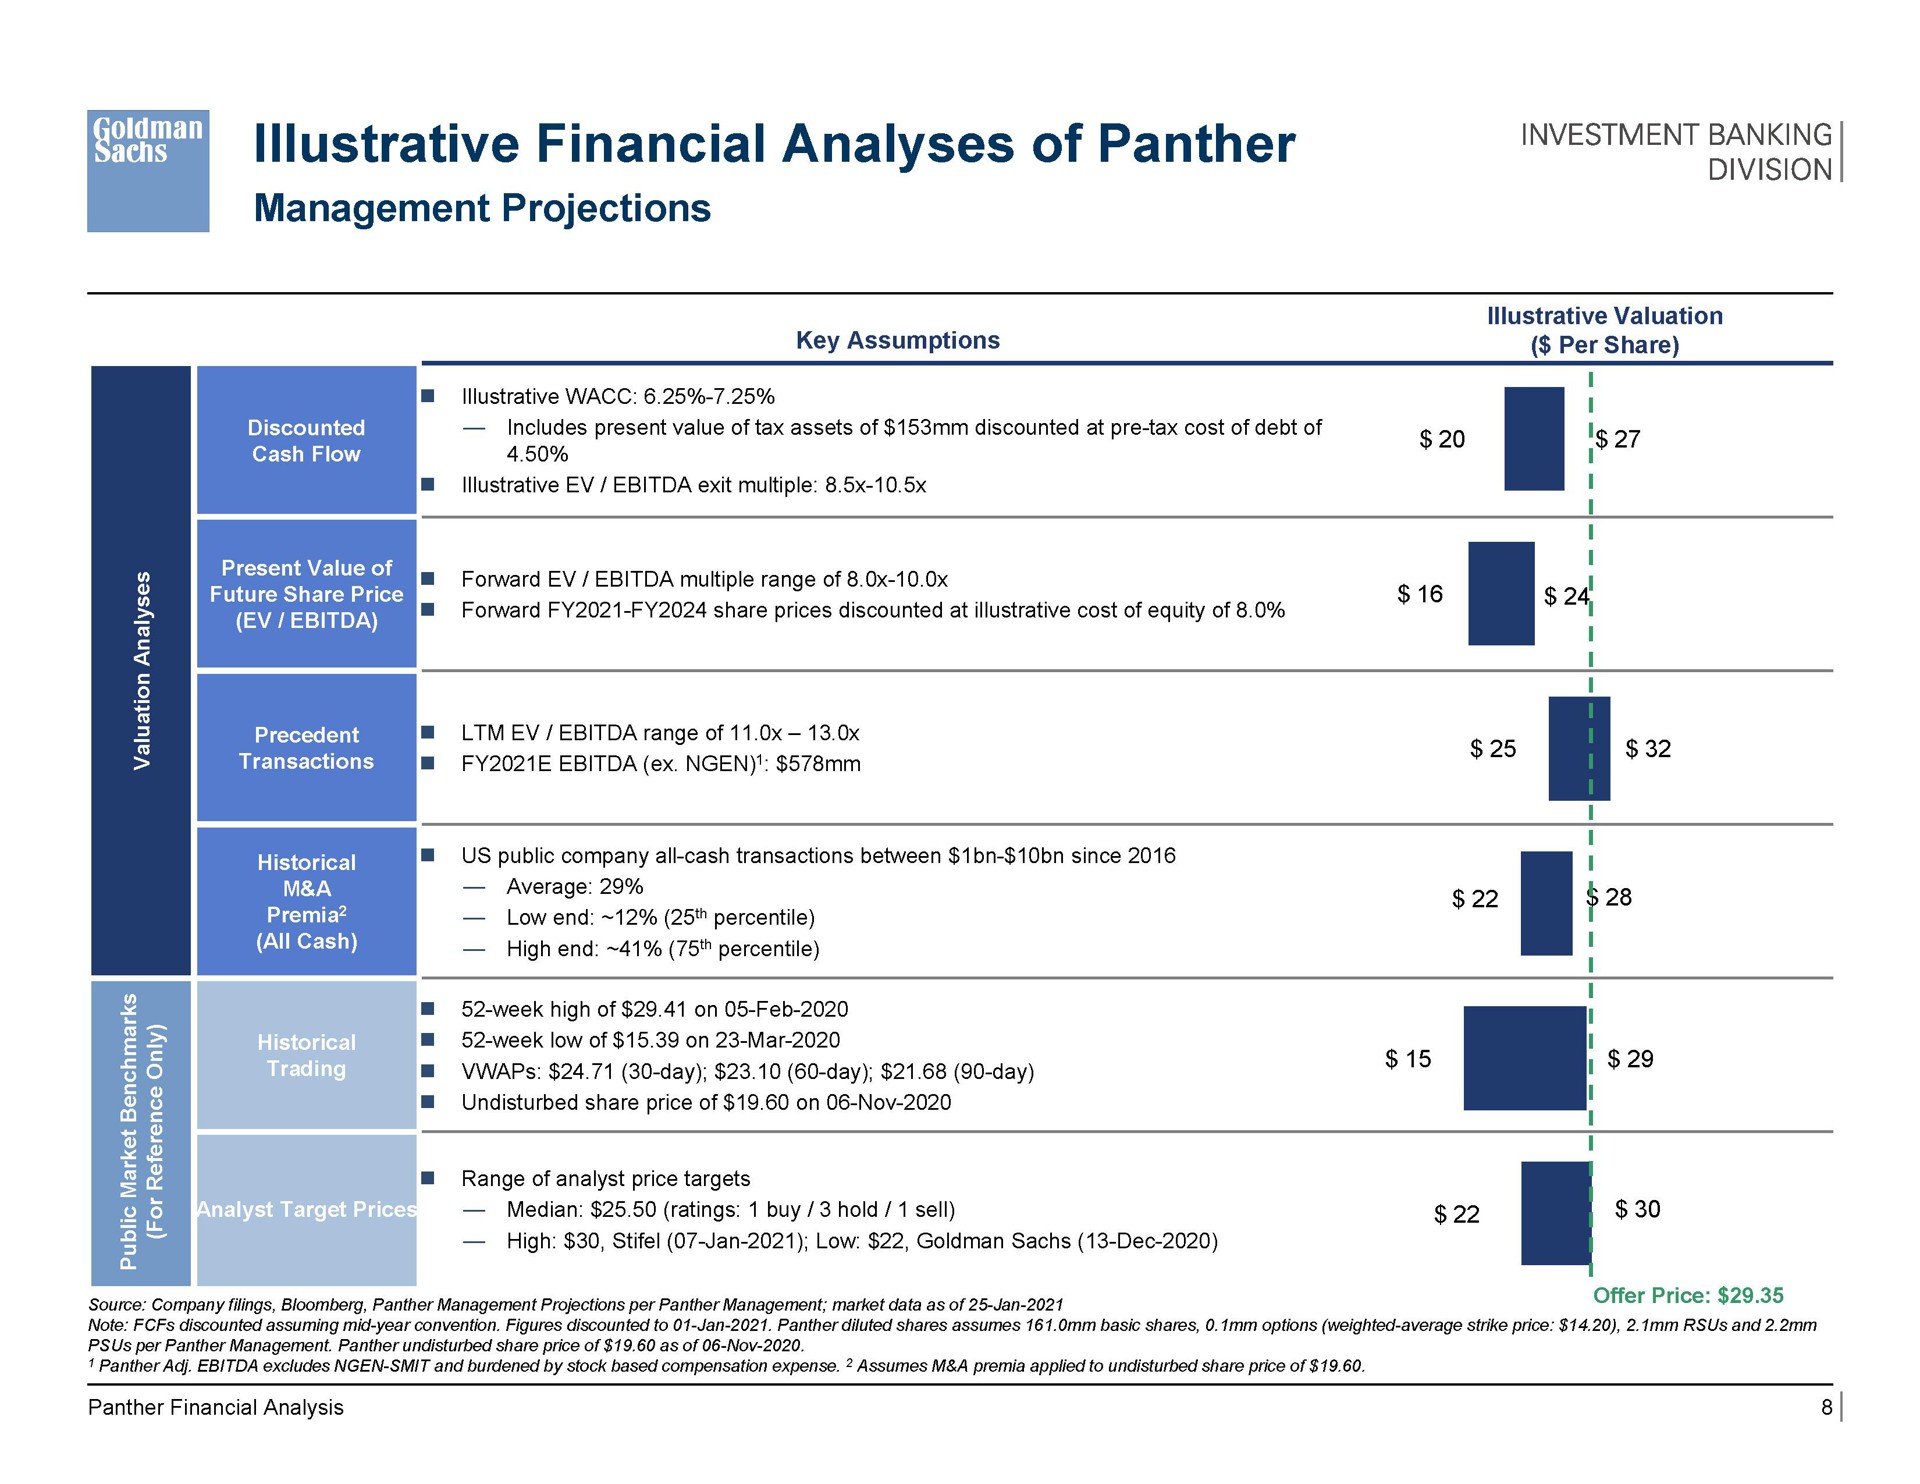 illustrative financial analyses of panther cee ean | Goldman Sachs